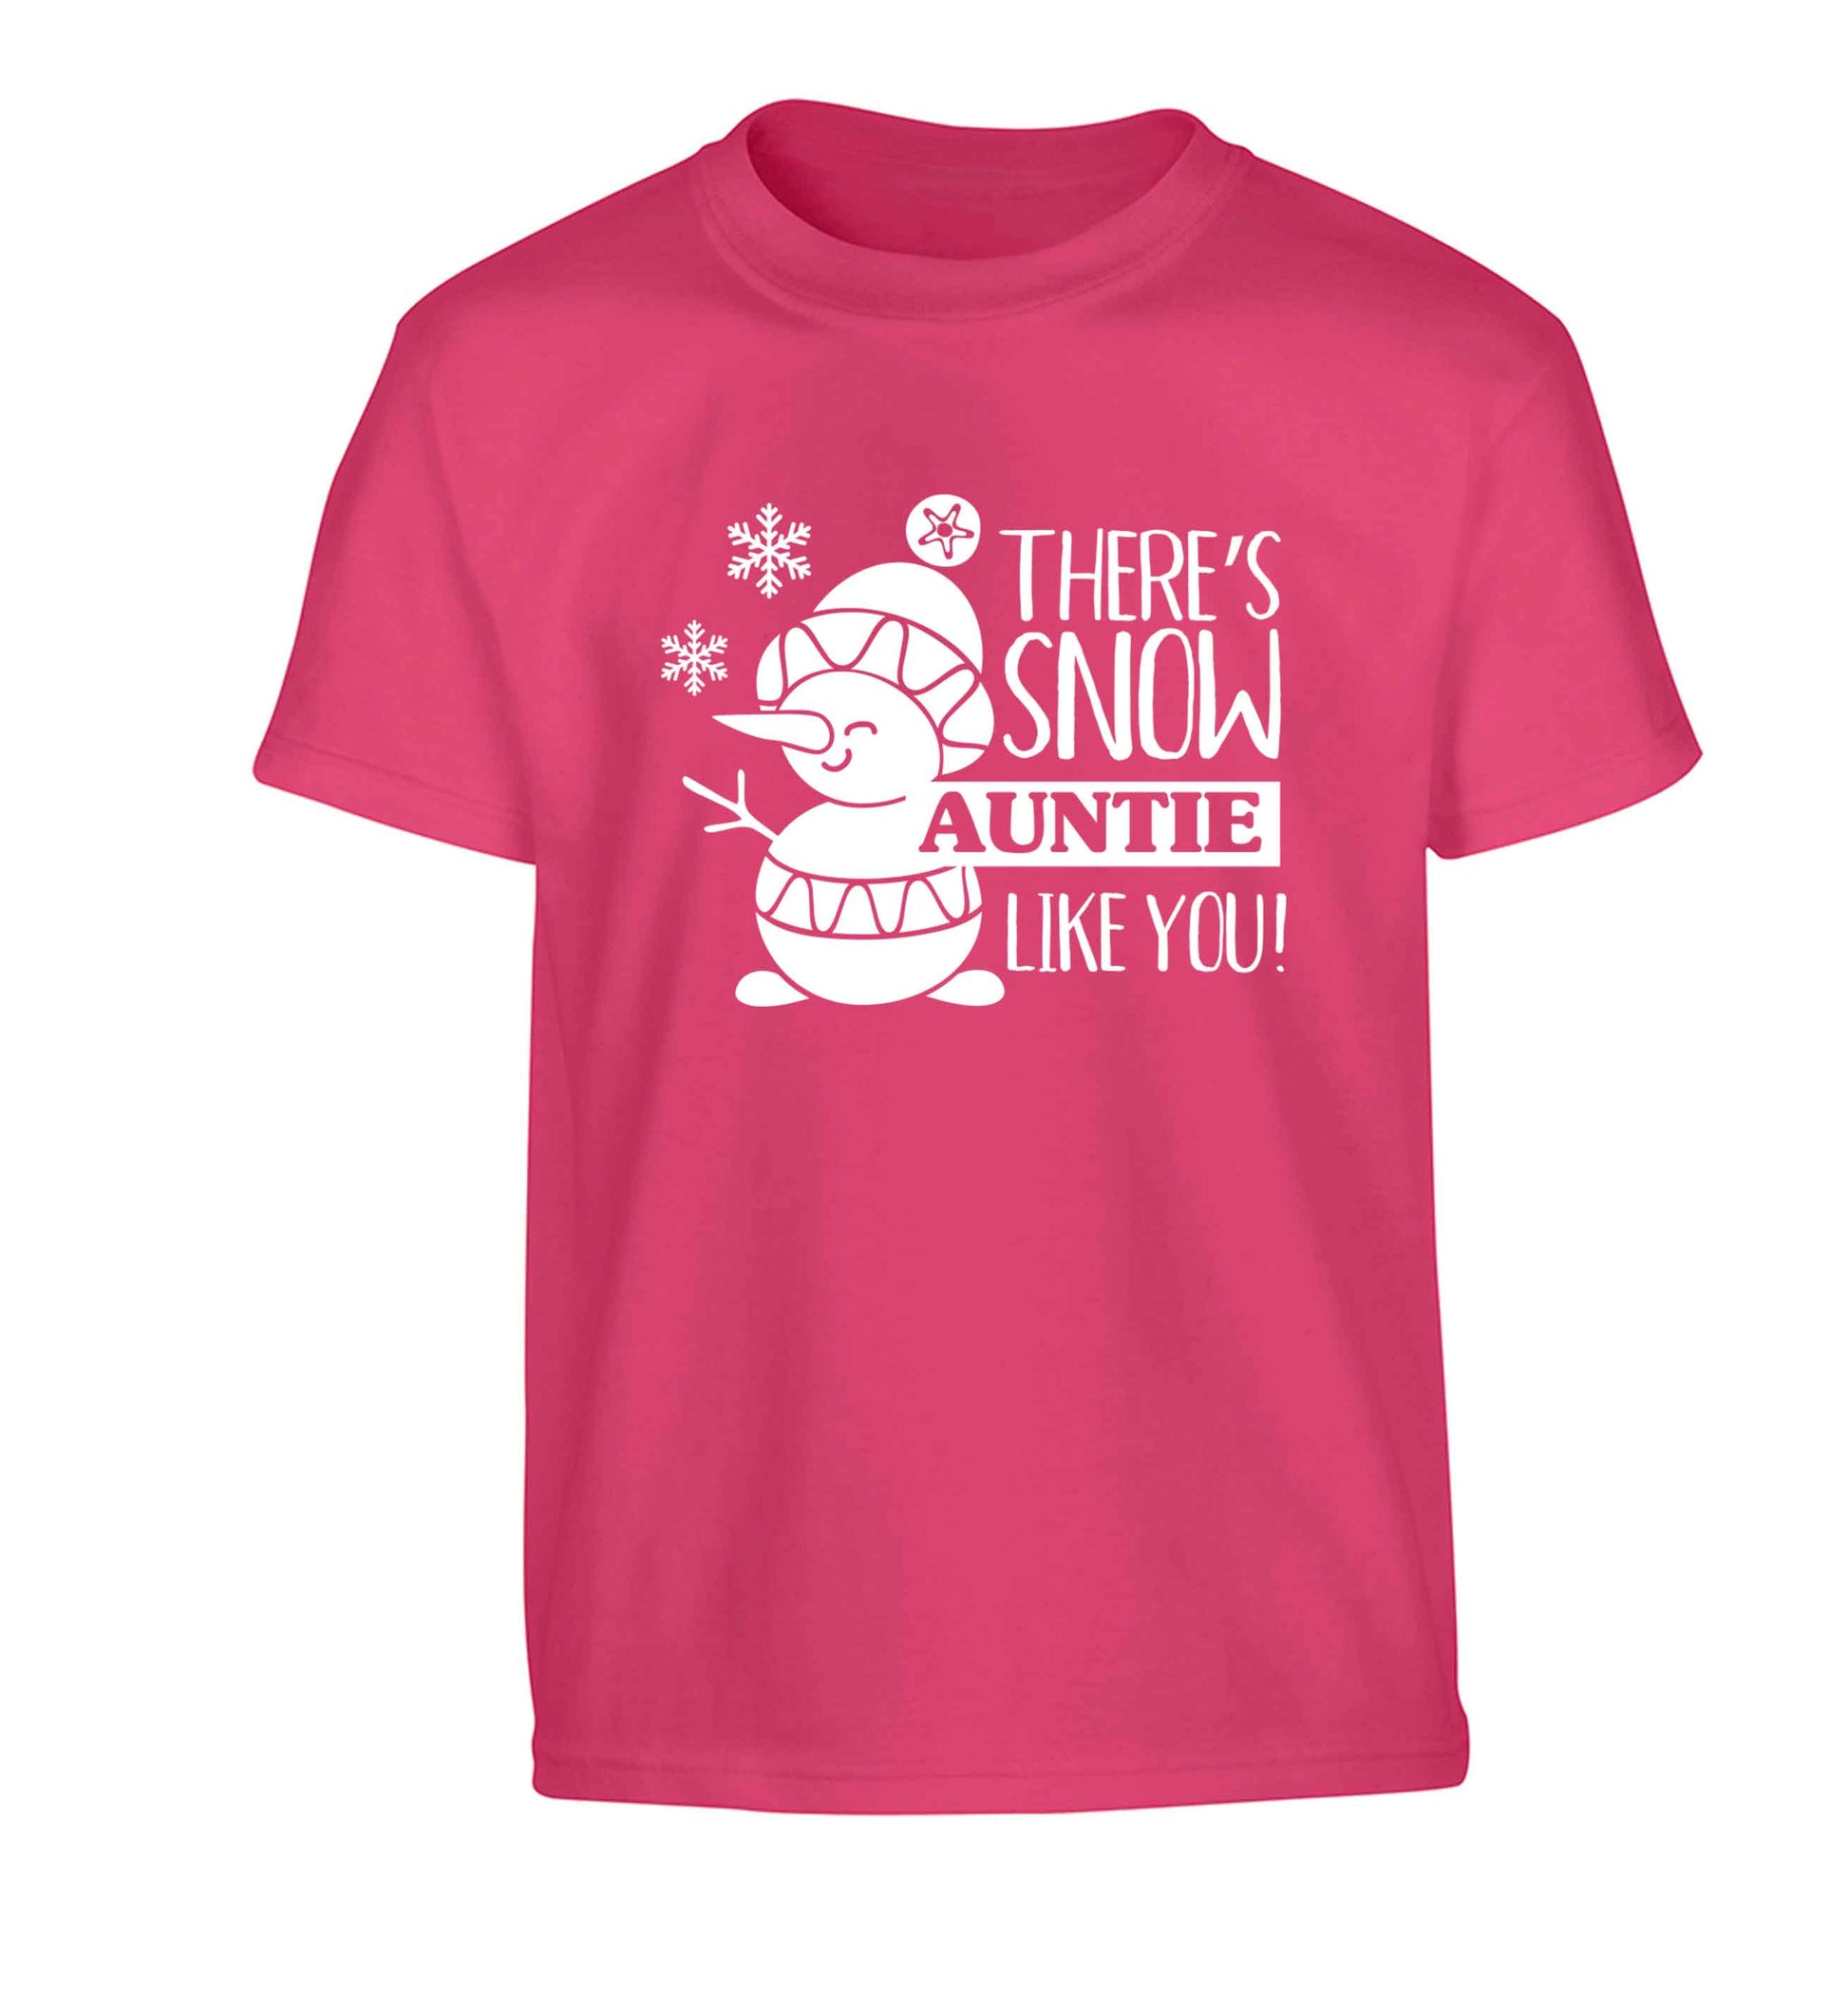 There's snow auntie like you Children's pink Tshirt 12-13 Years